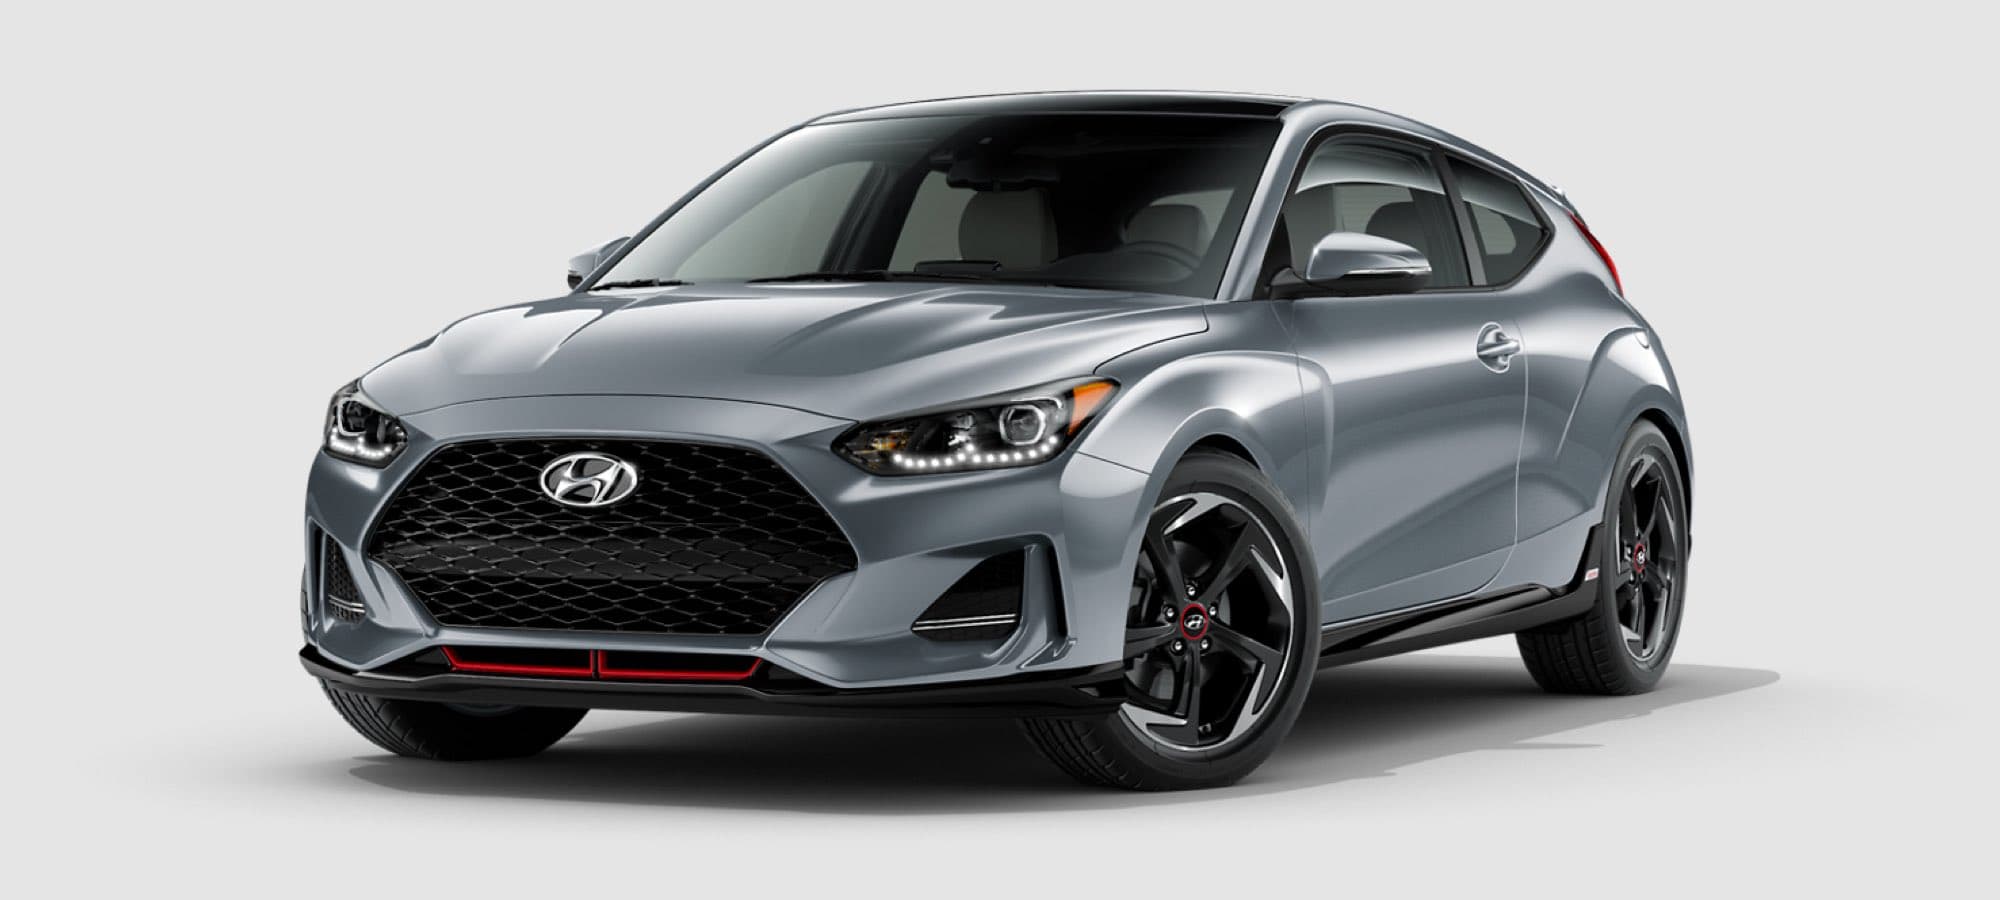 2021 Hyundai Veloster Colors, Price, Specs | Norm Reeves Hyundai Superstore